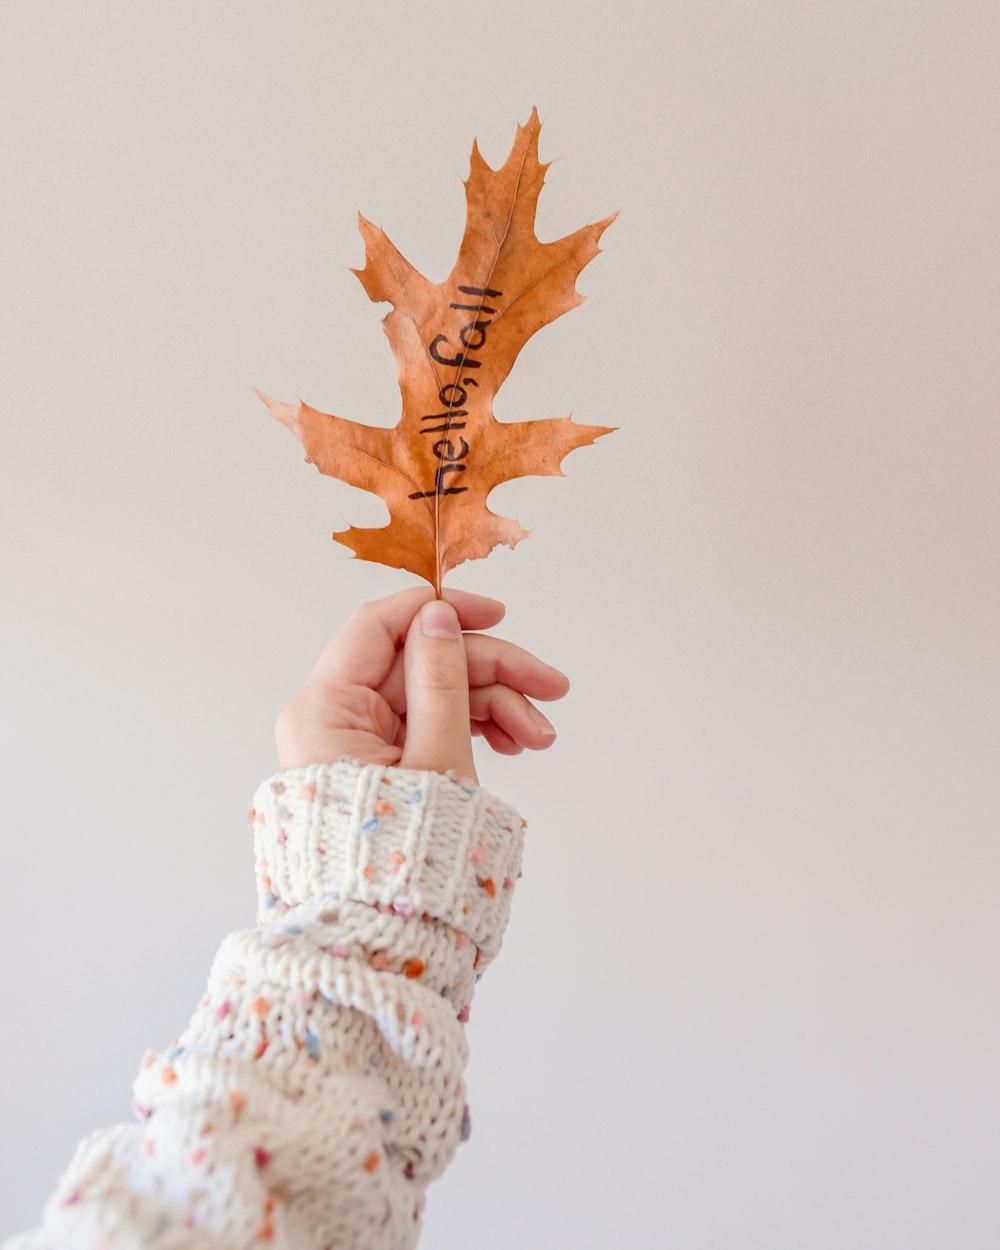 a person holding a leaf with the word autumn written on it